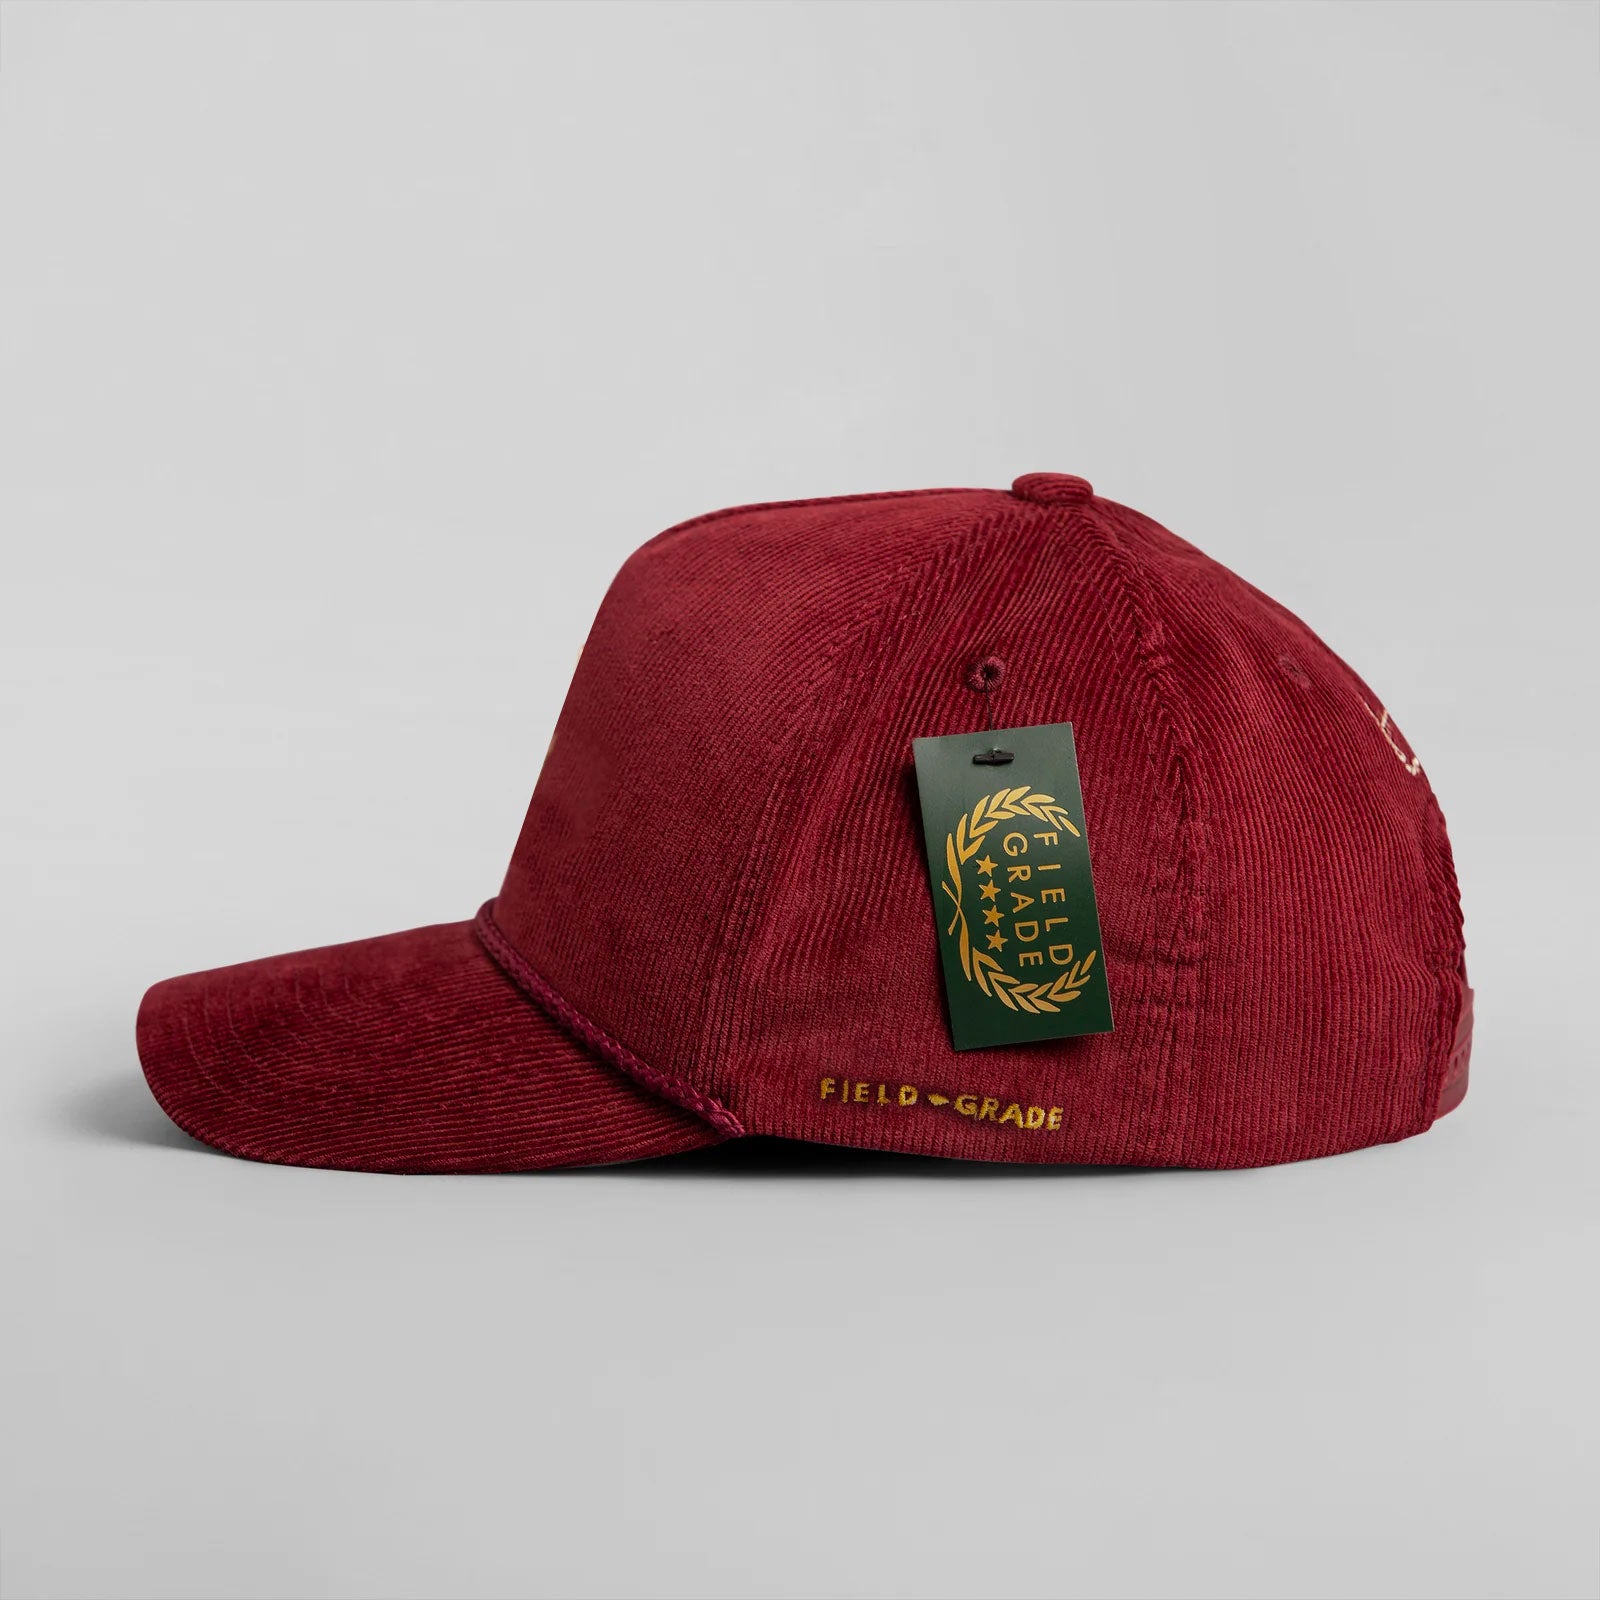 HAVE A NICE DAY BORDEAUX CORDUROY TRUCKER HAT